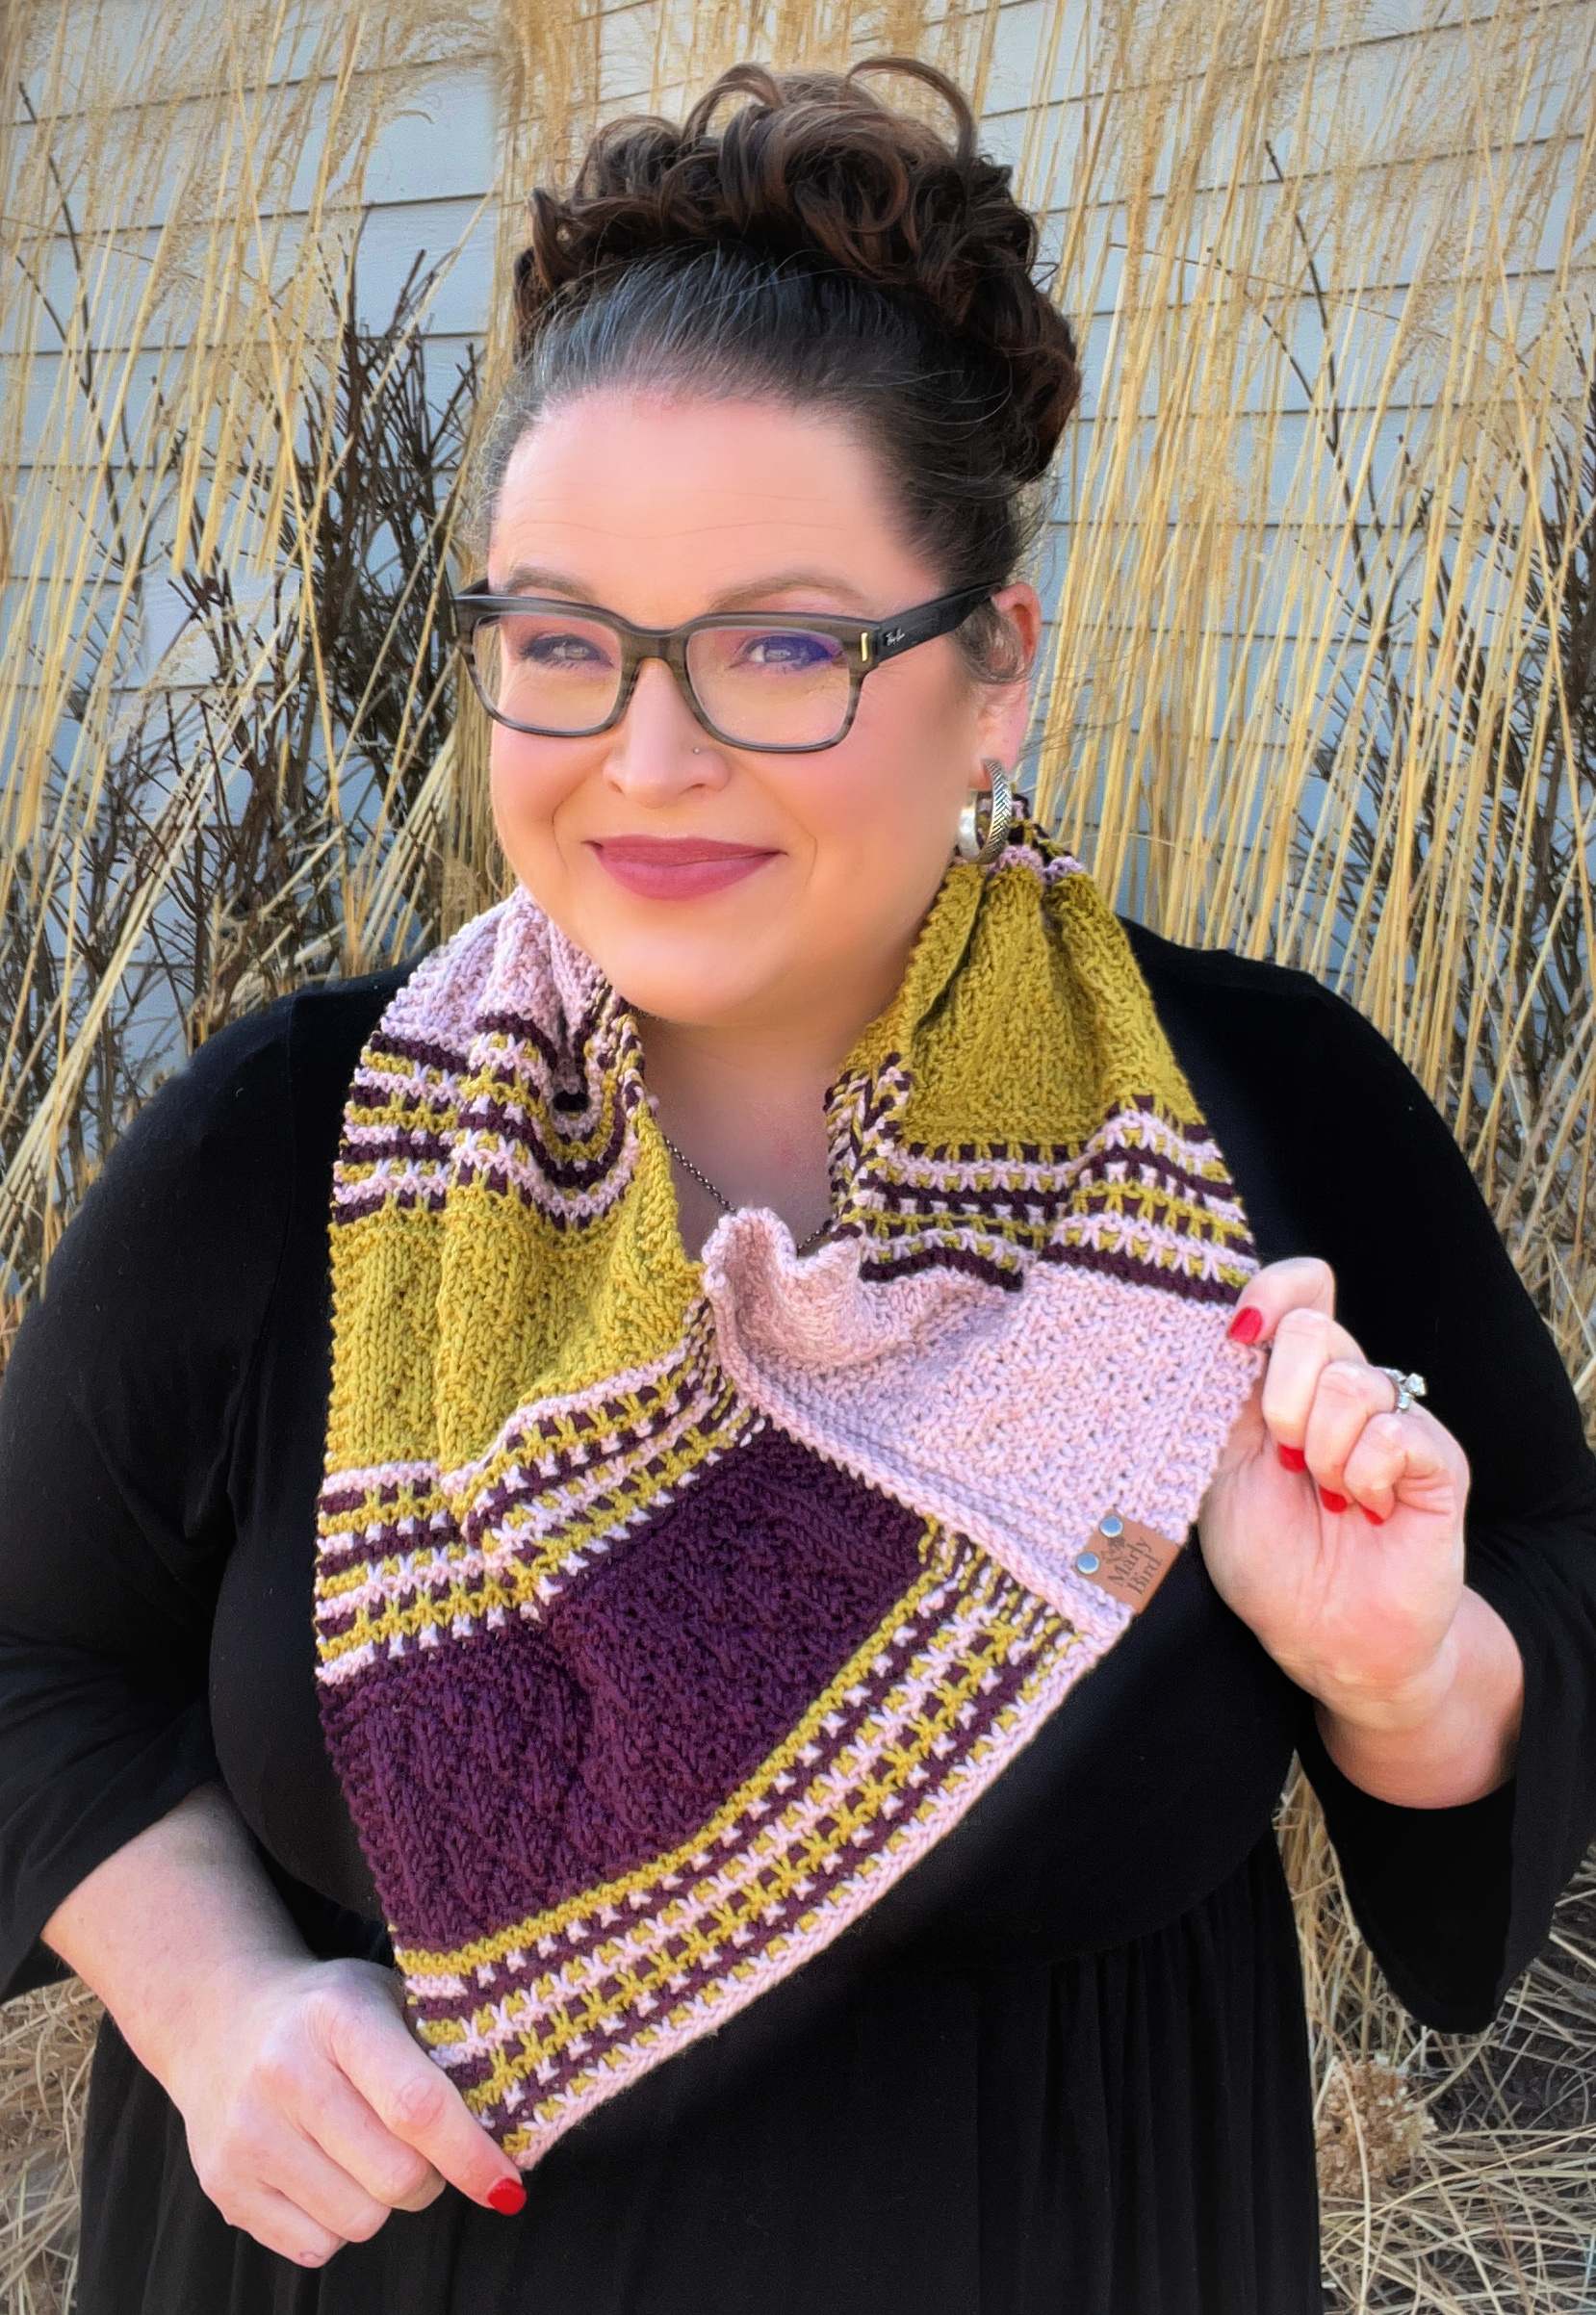 Alt text: "Marly Bird showcasing the Bamberg Bandana Cowl, posing confidently outdoors with tall, golden grass in the background. The cowl features a striking combination of yellow, purple, and pink hues with rich textures. Marly is smiling, wearing glasses, and has her hair styled in an updo. The cowl is artfully draped to display the intricate stitch patterns and a small branded label with 'Marly Bird' is visible on the edge of the cowl.